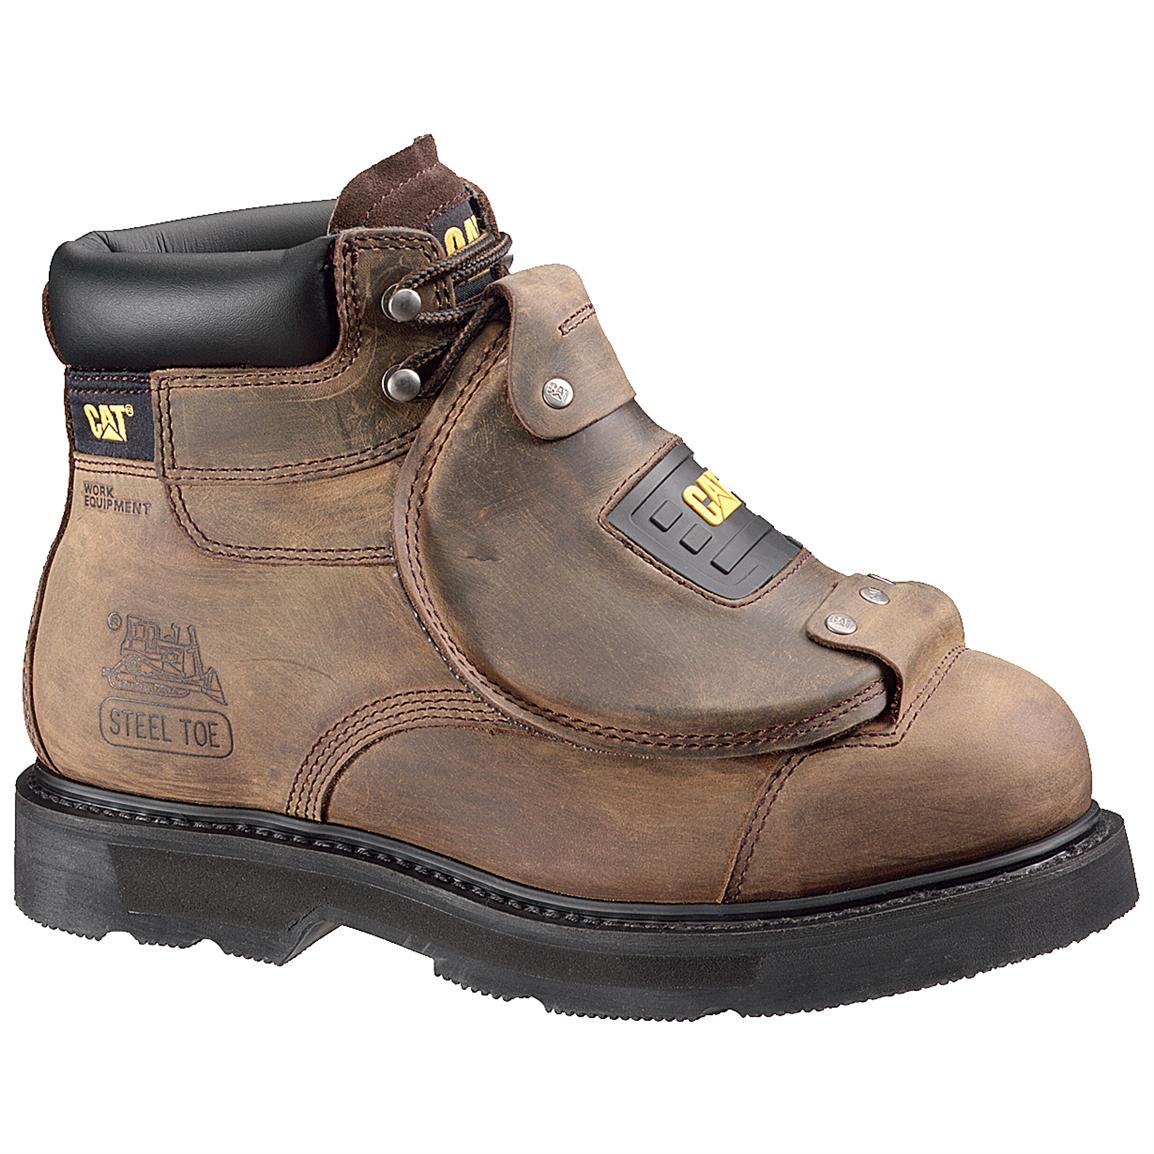 Men's CATÂ® 6 inch Assault Steel Toe Work Boots, Brown - 195440, Work Boots at Sportsman's Guide